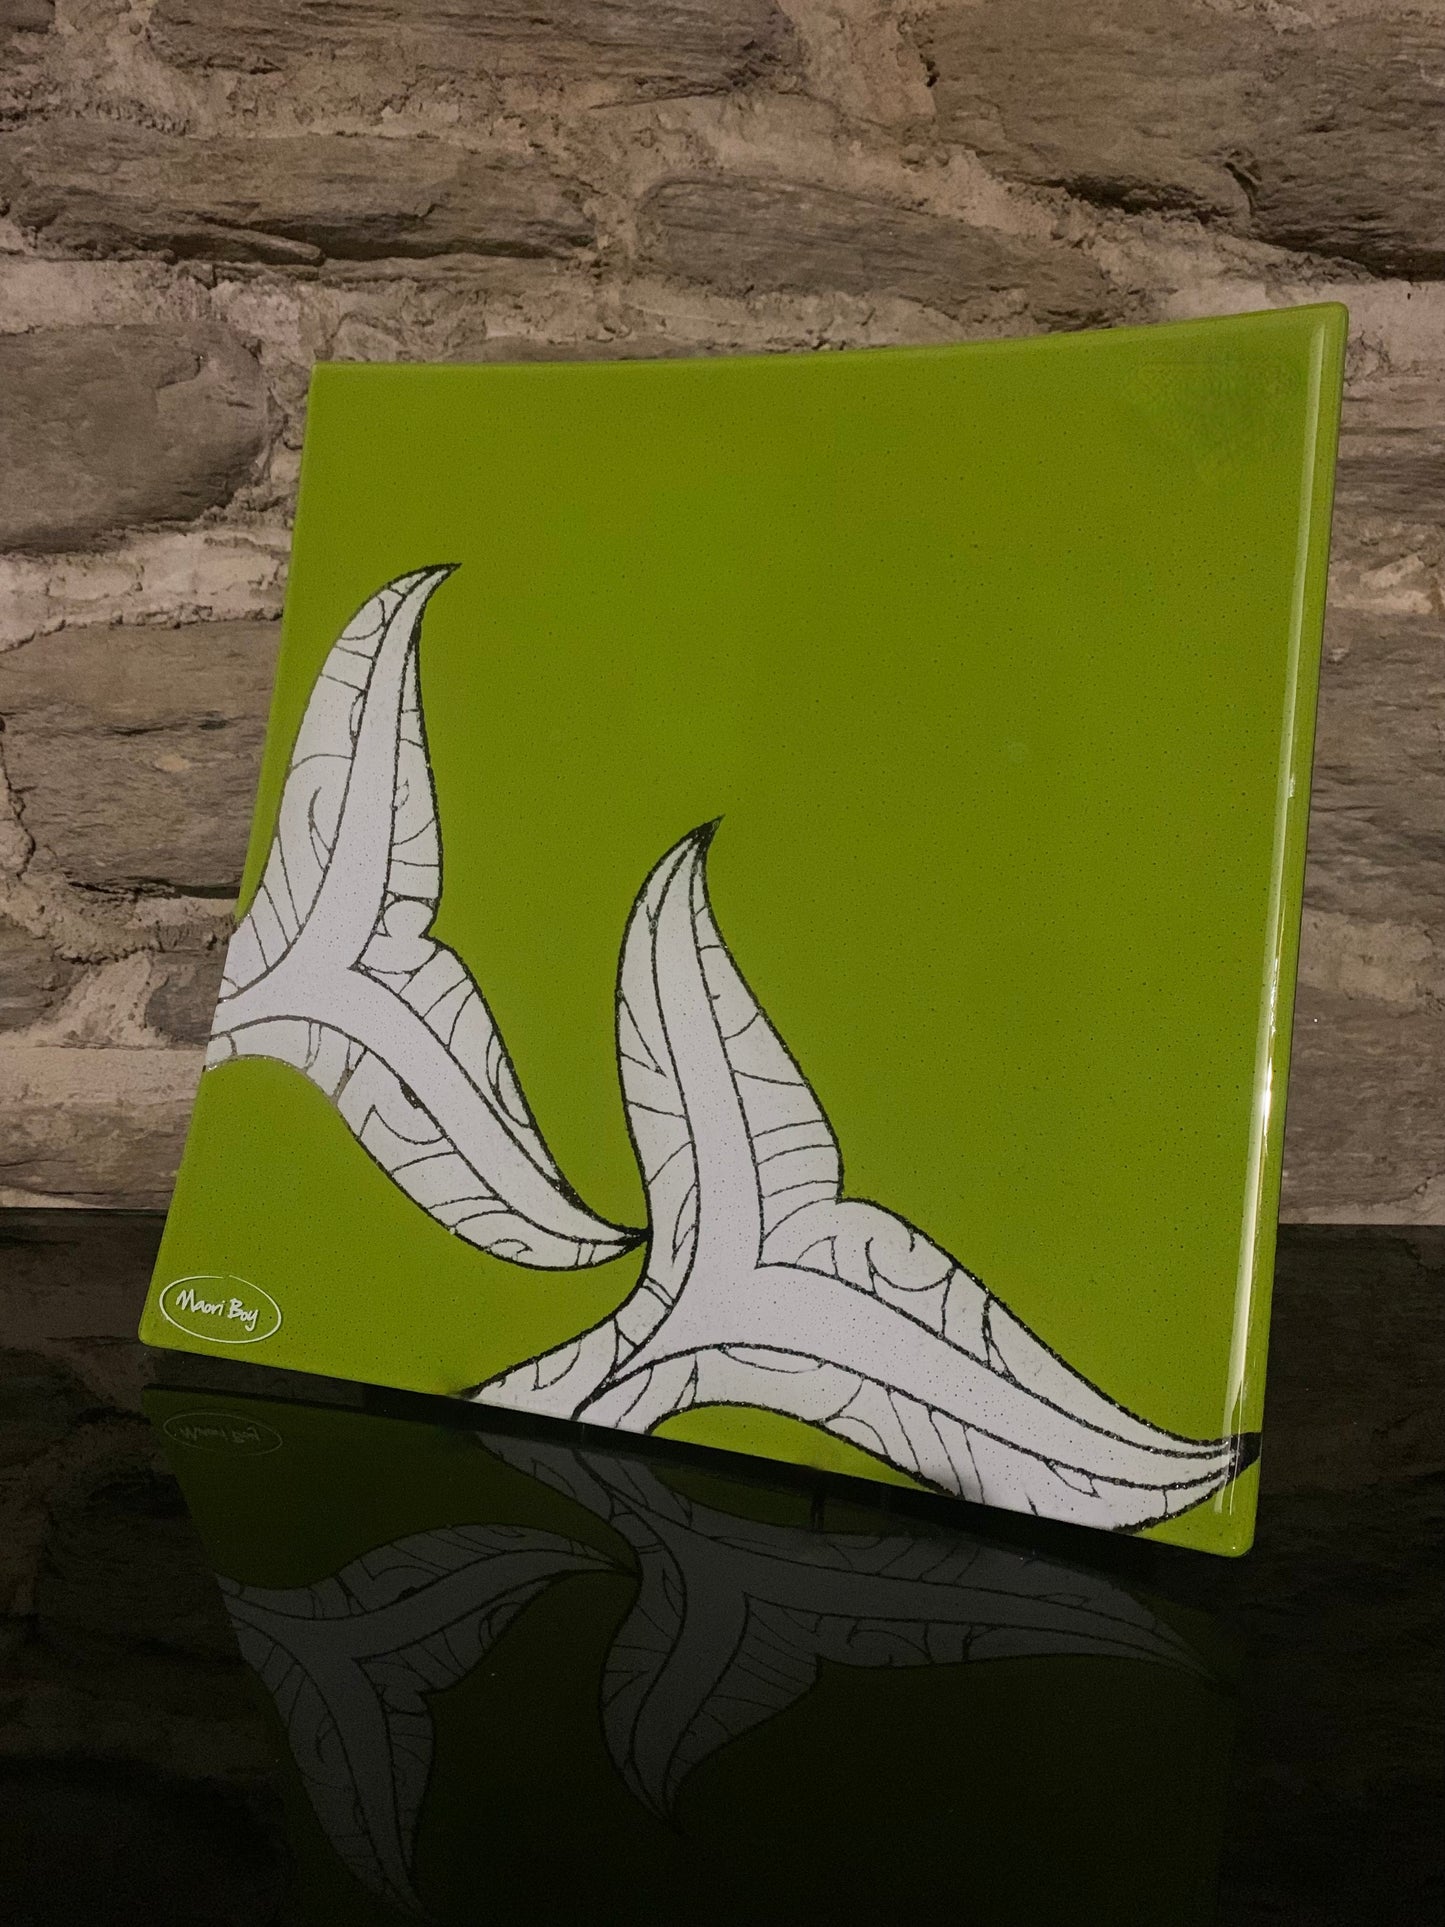 Fused Glass Platter by Maori Boy - Whale Tail Design (lime green) 30cm